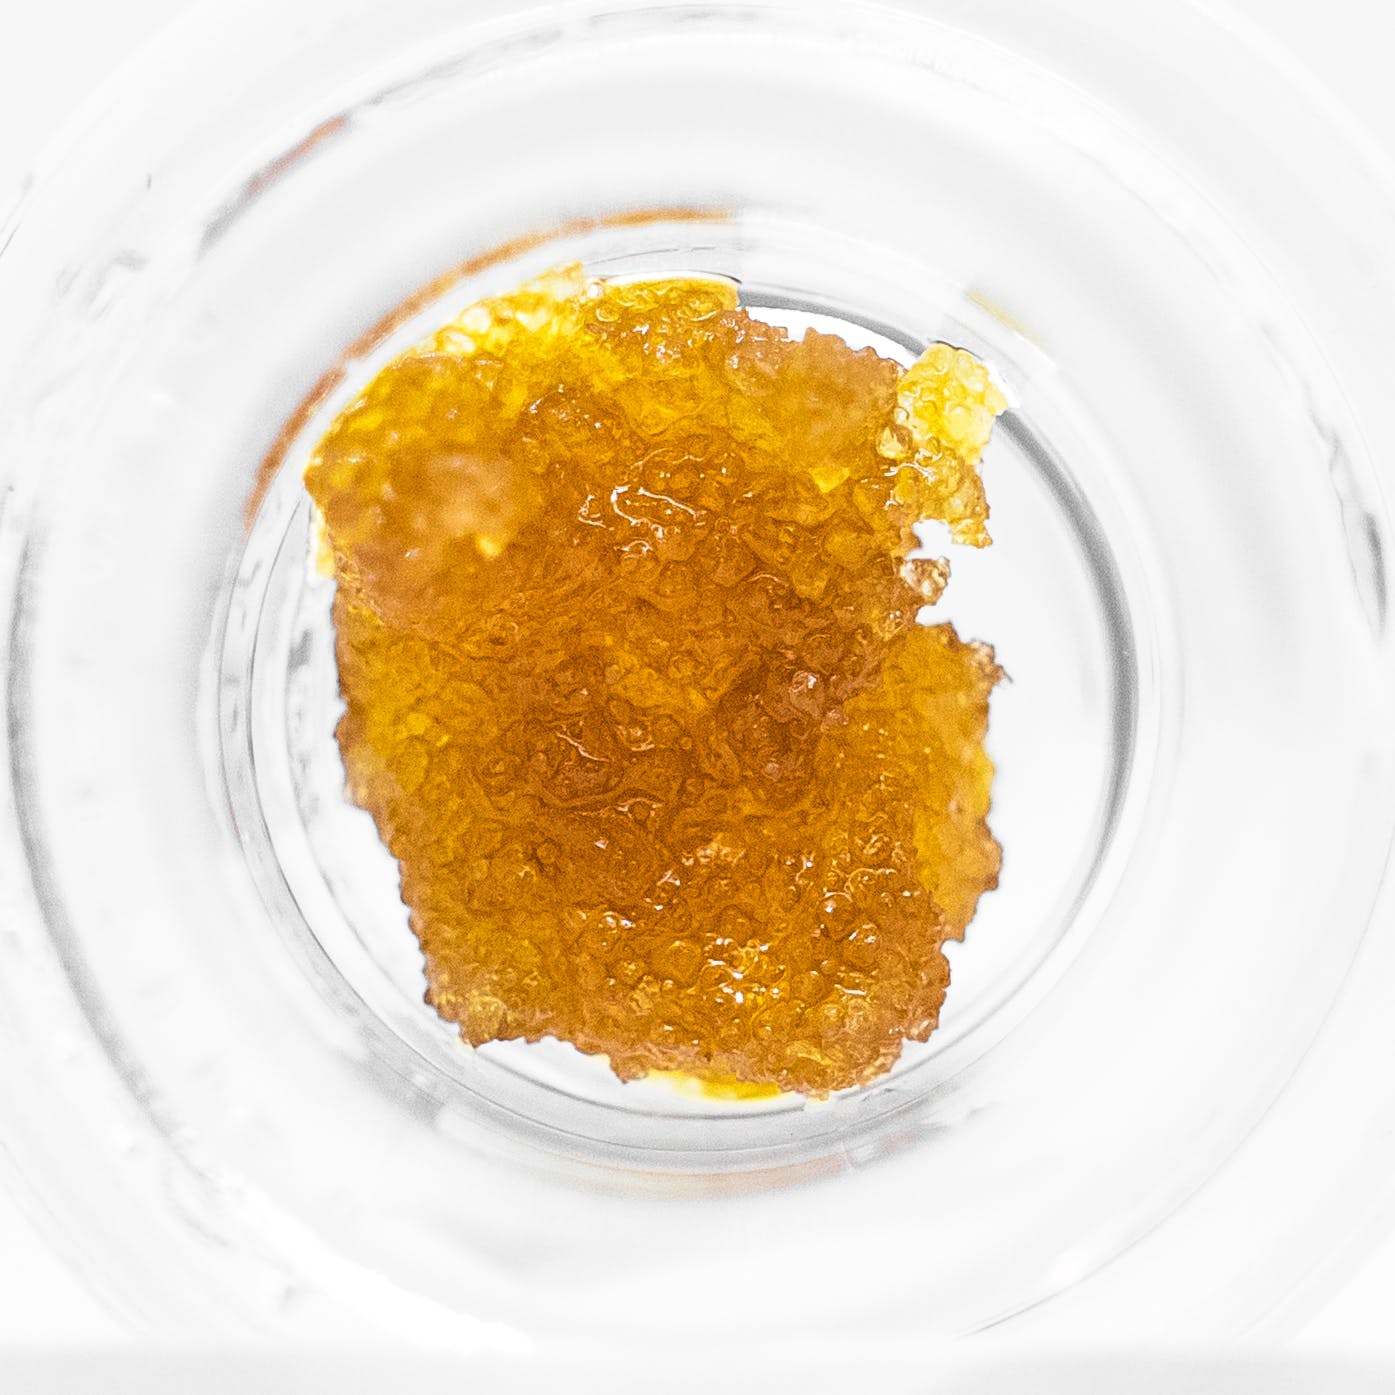 concentrate-2445-csc-blue-dream-live-resin-sh-90-30-25-buy-one-2c-get-one-50-25-off